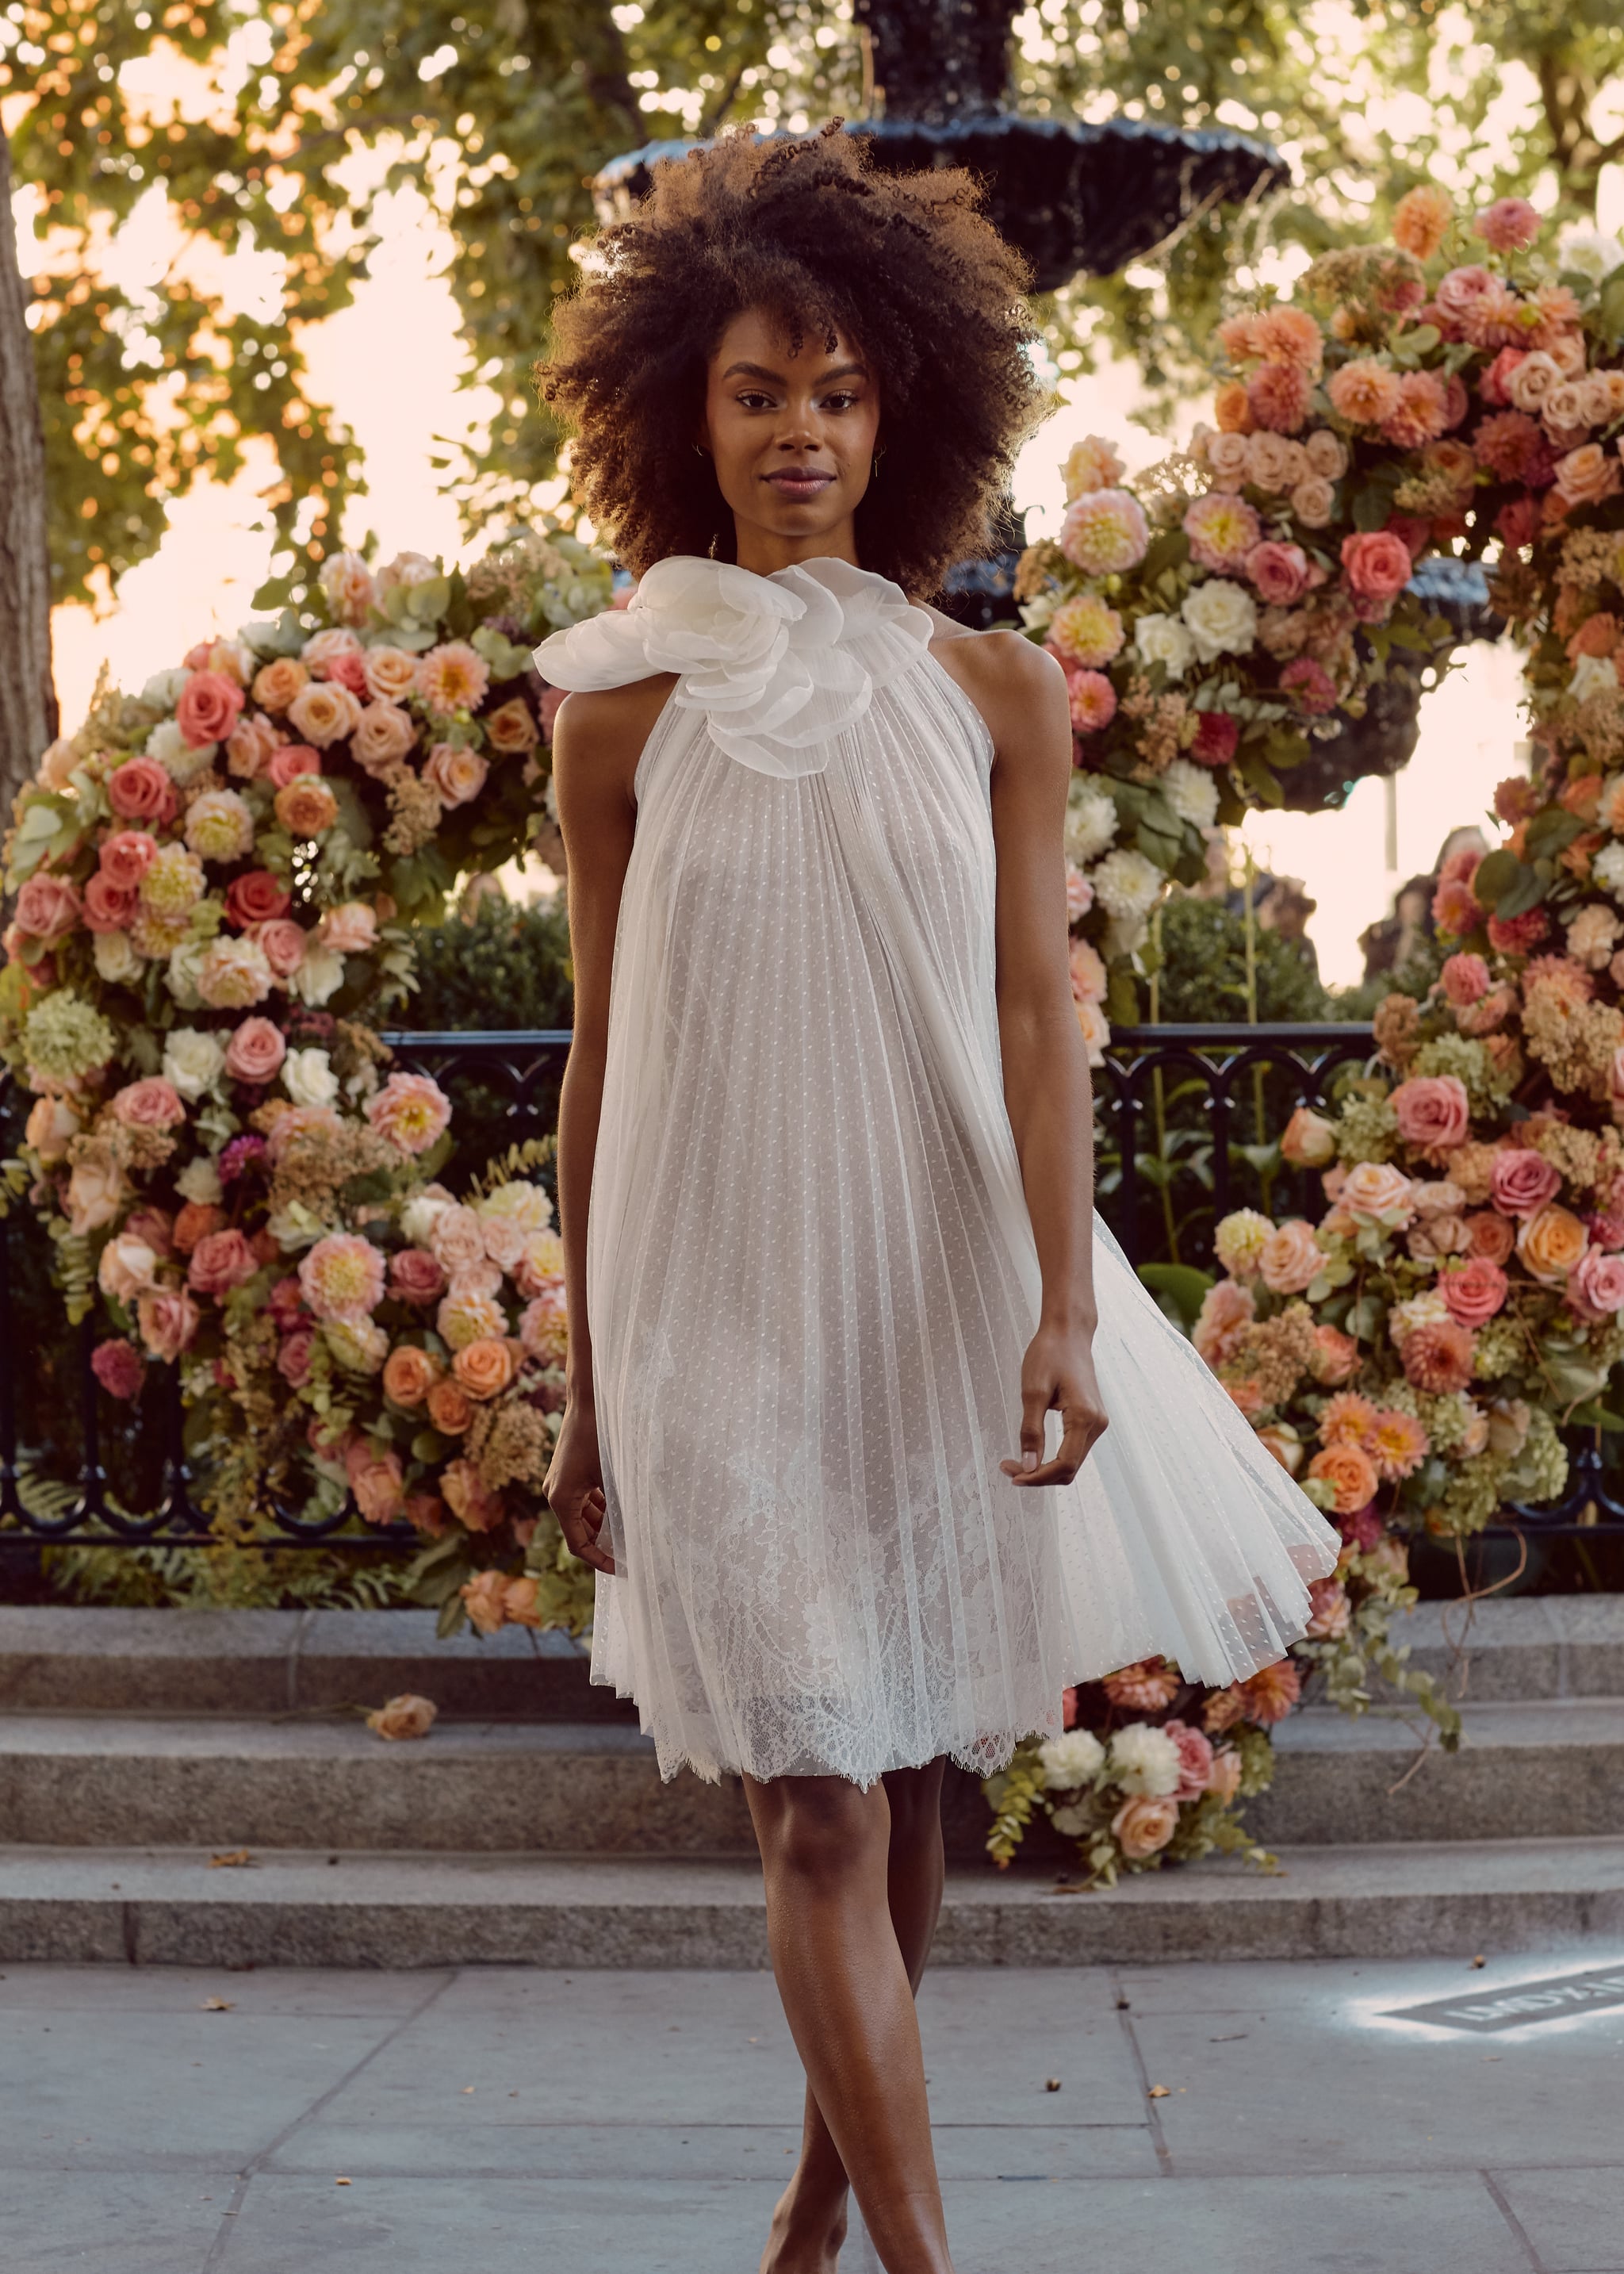 Here are four of the top trends in wedding dresses